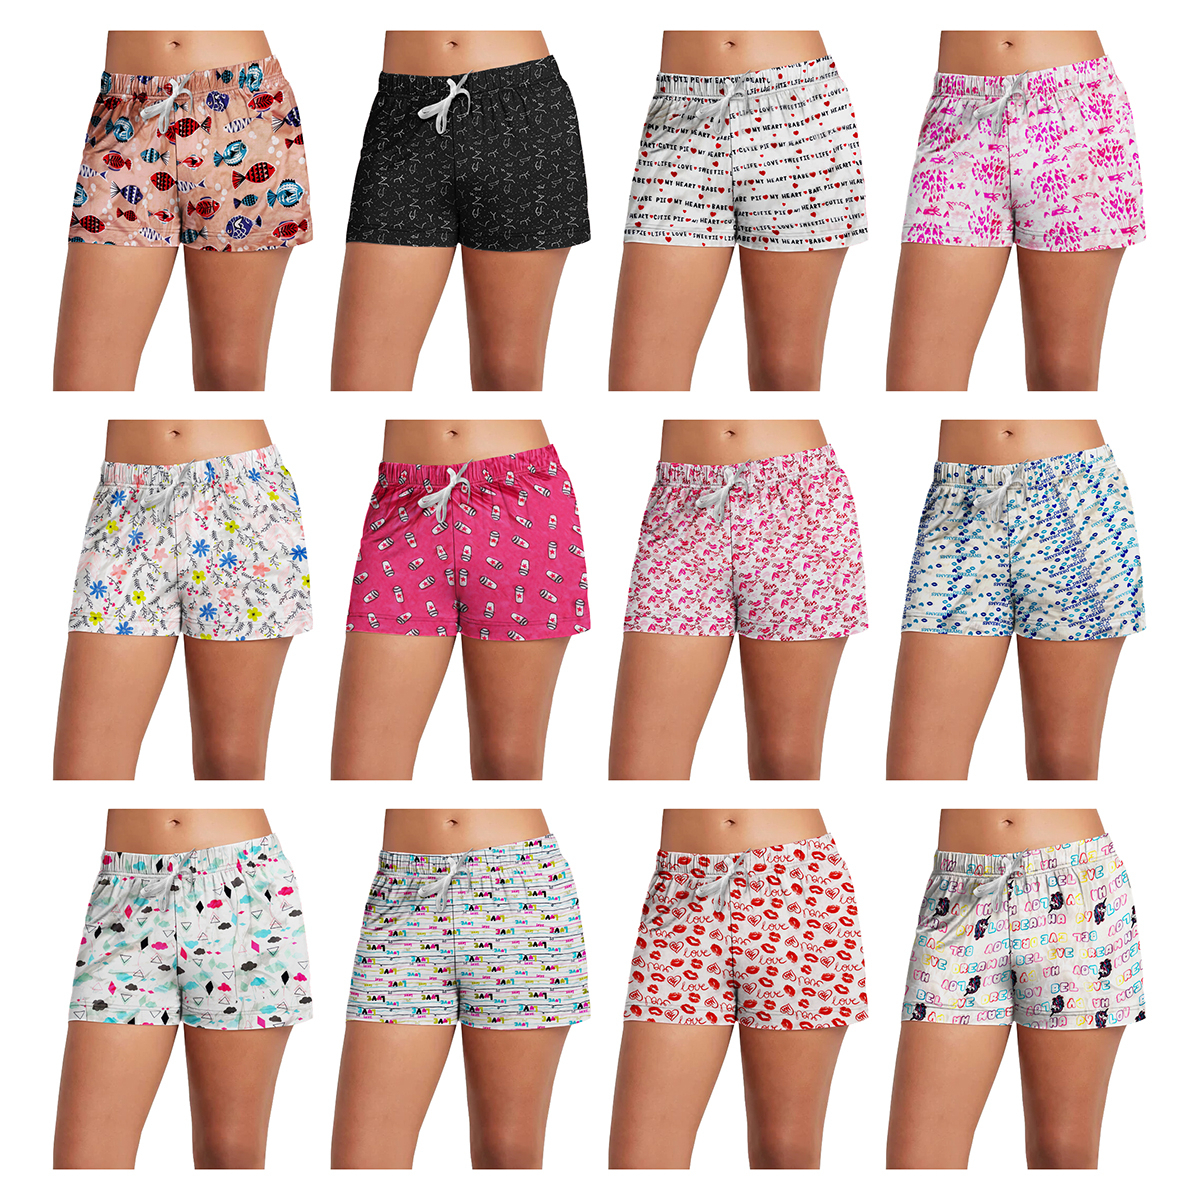 3-Pack : Women's Comfy Lounge Bottom Pajama Shorts W/Drawstring - Assorted Styles, X-Large